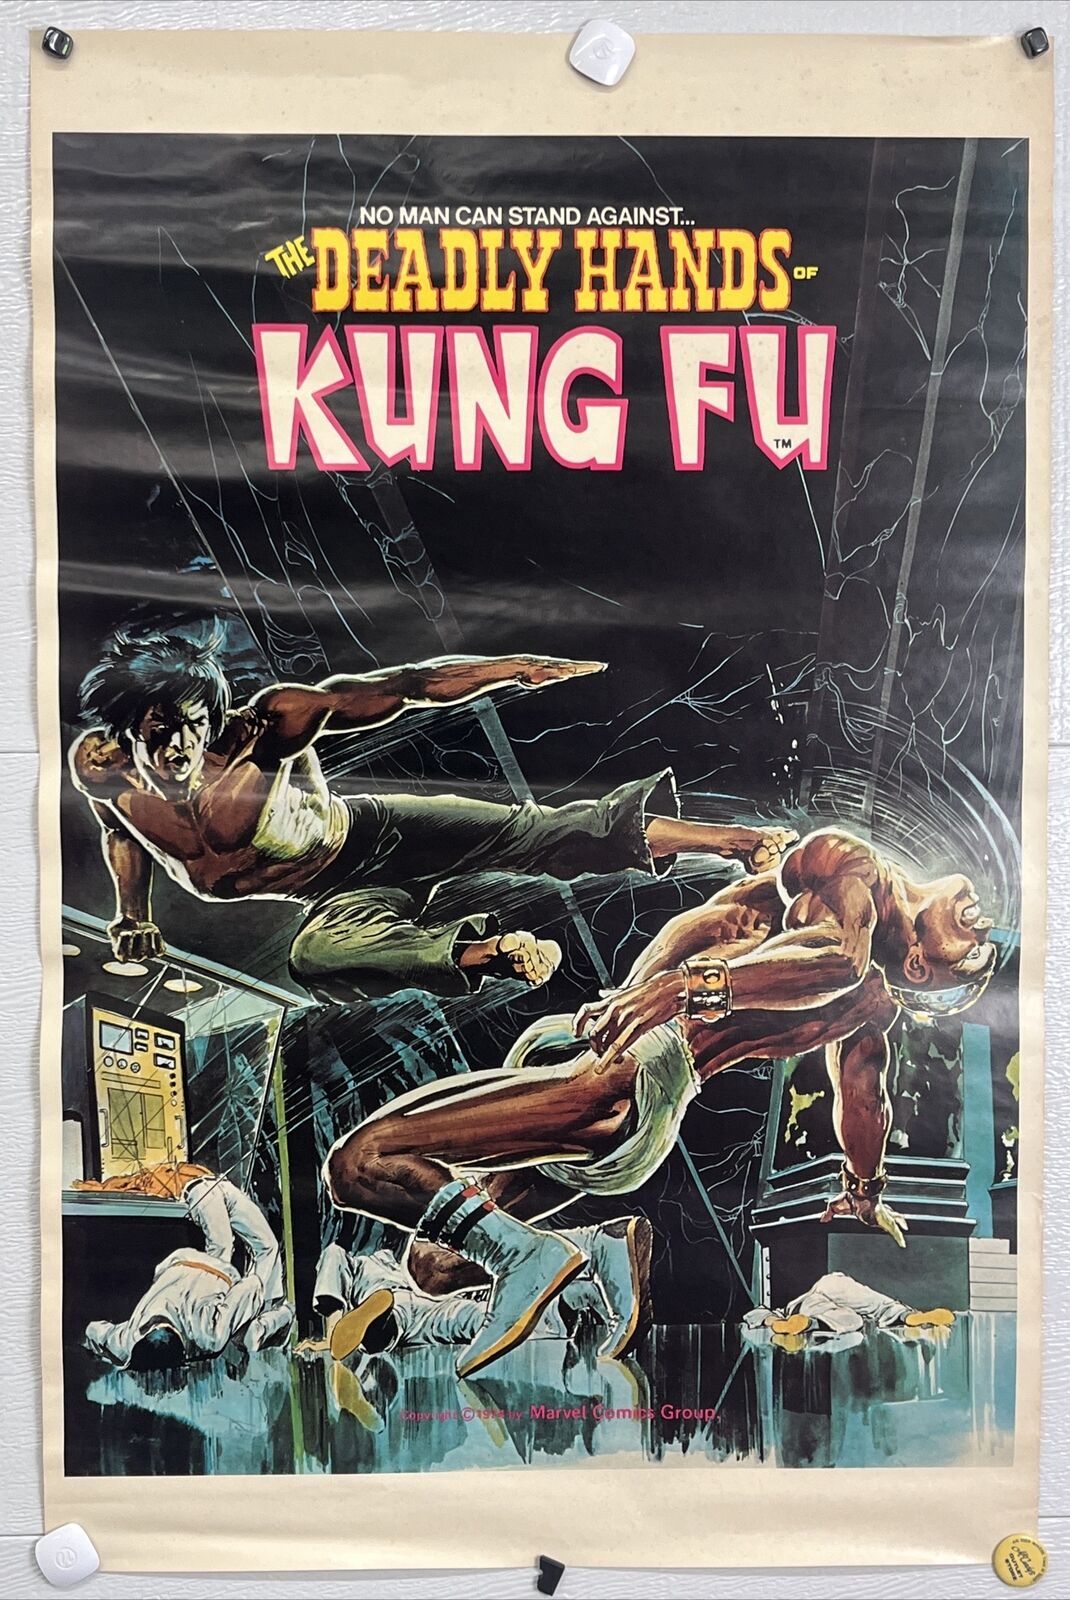 Rare vintage 1974 Marvel comics the deady hands of KUNG FU poster